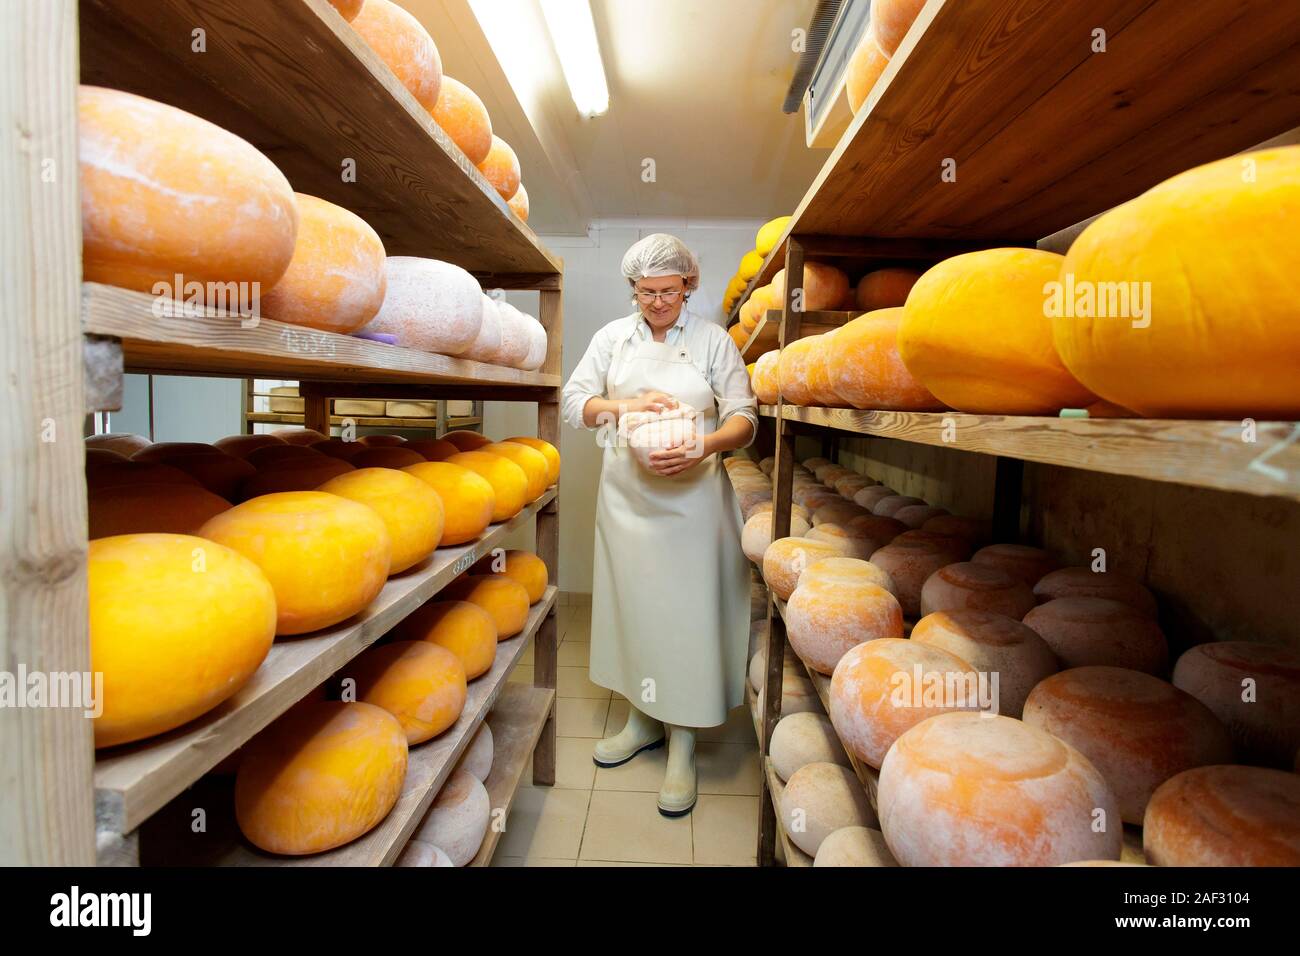 La fromagerie dIsa, organic cheese from the farm Ferme du Wint in Brunembert (northern France). Brand Valeurs Parc naturel regional (Regional N Stock Photo